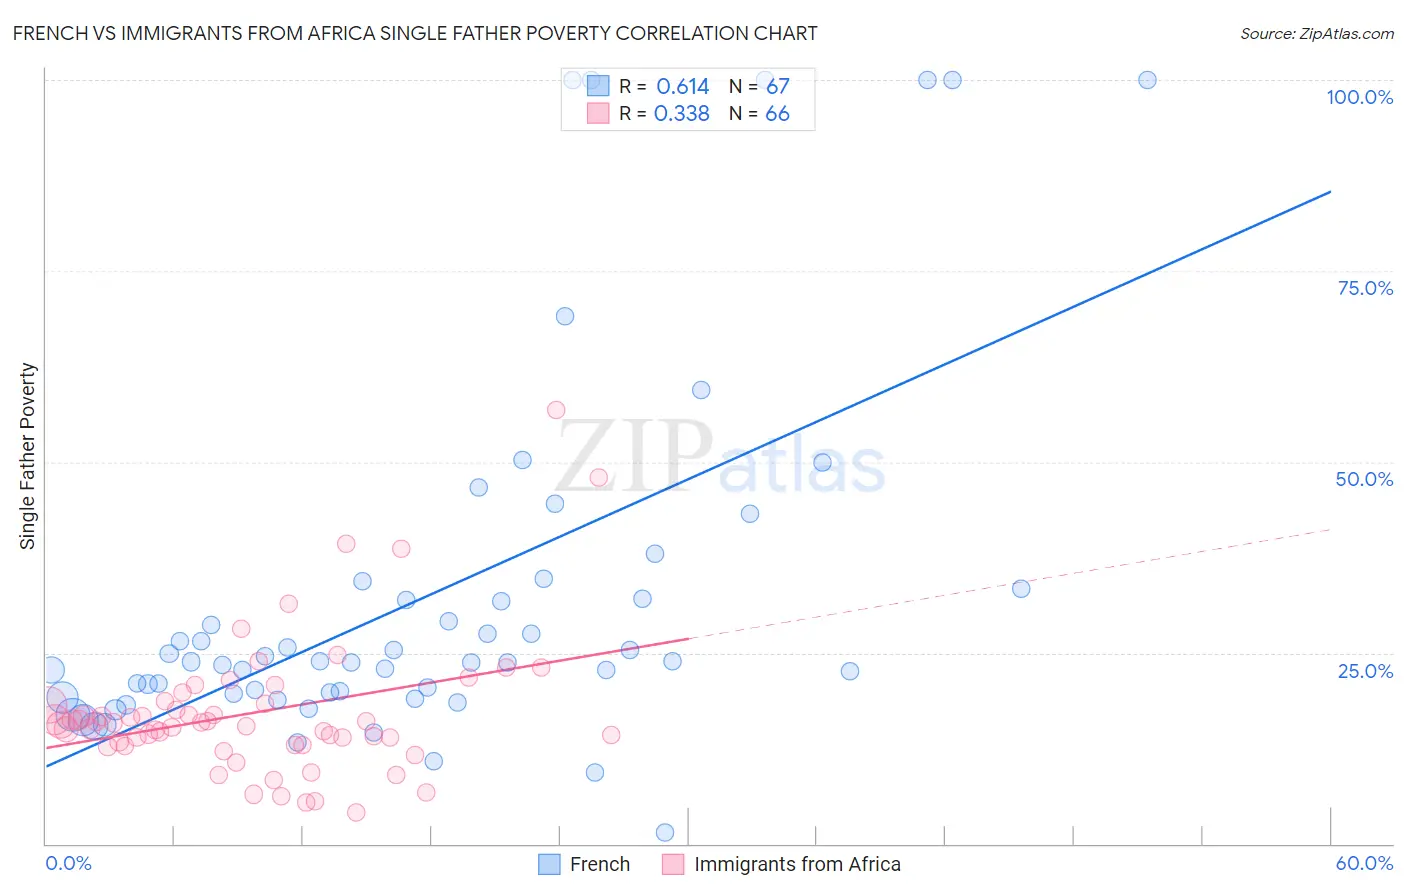 French vs Immigrants from Africa Single Father Poverty